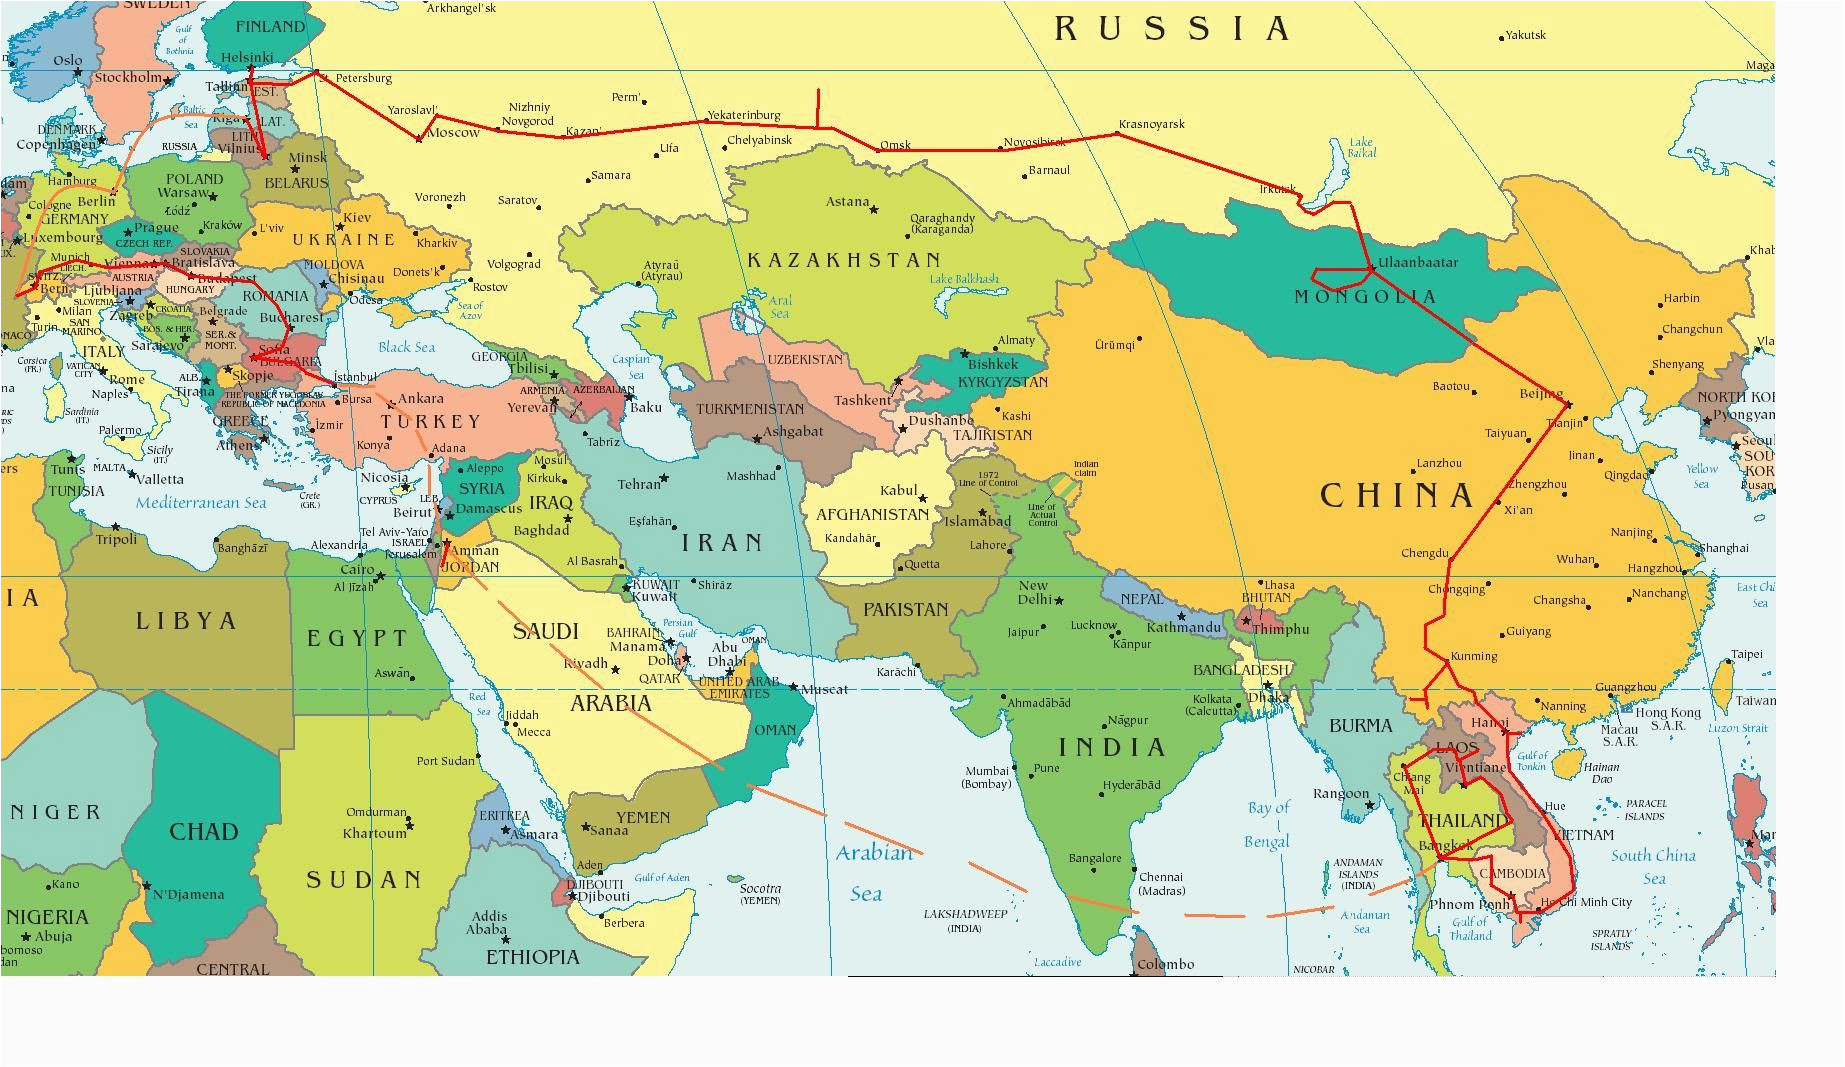 Map Of Europe Middle East and asia Eastern Europe and Middle East Partial Europe Middle East